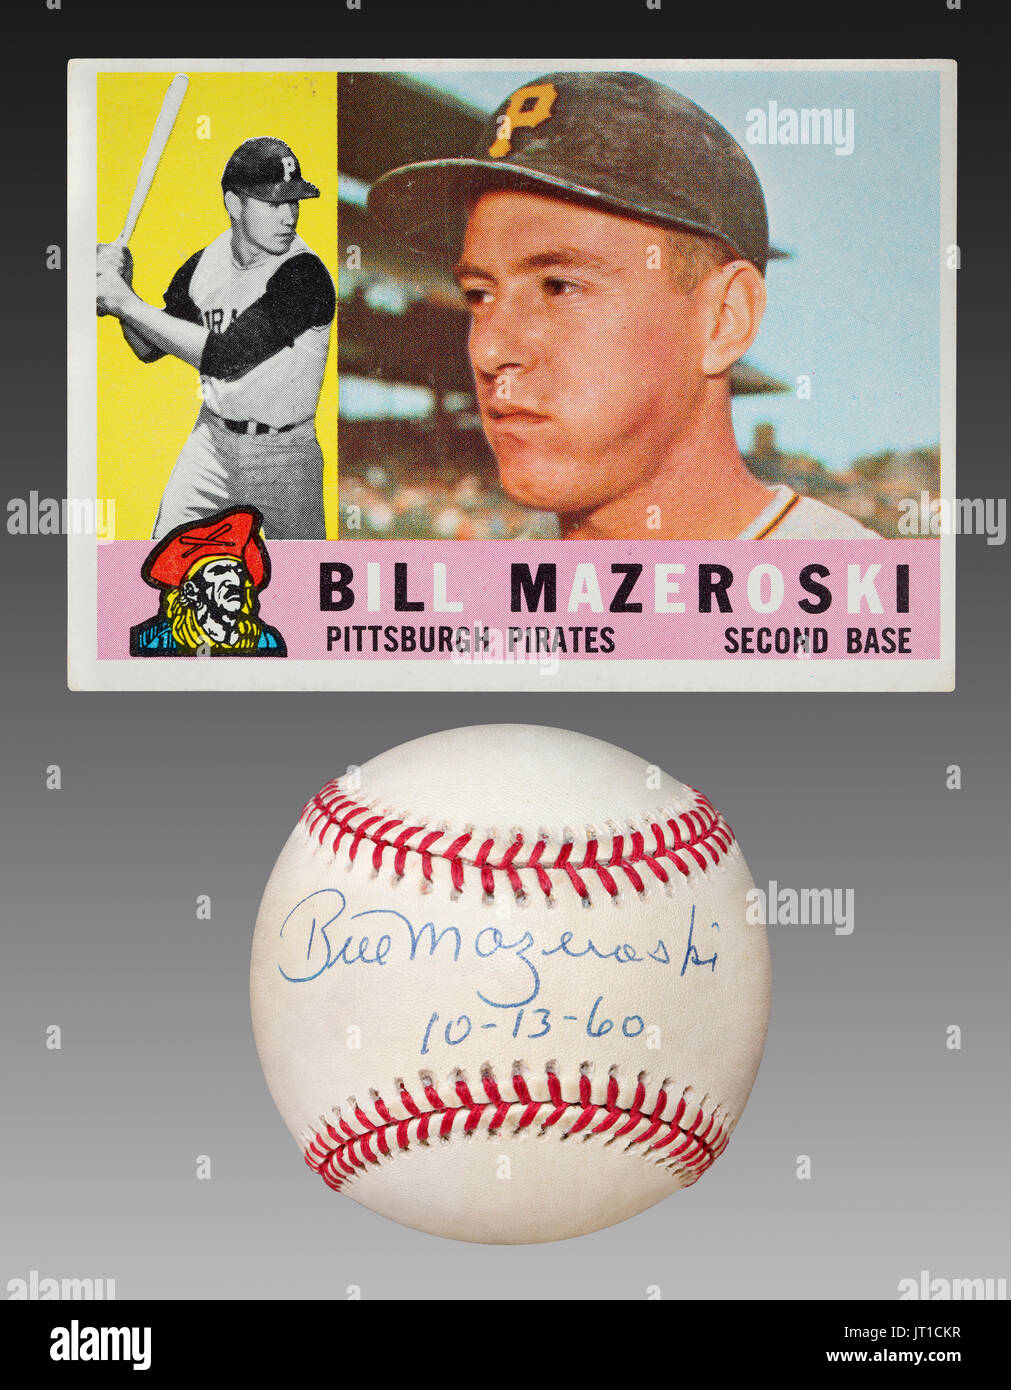 1960 baseball card and autographed baseball by Pittsburgh Pirate second baseman Bill Mazeroski dated 10-13-60.  Bill is the only player in MLB history Stock Photo